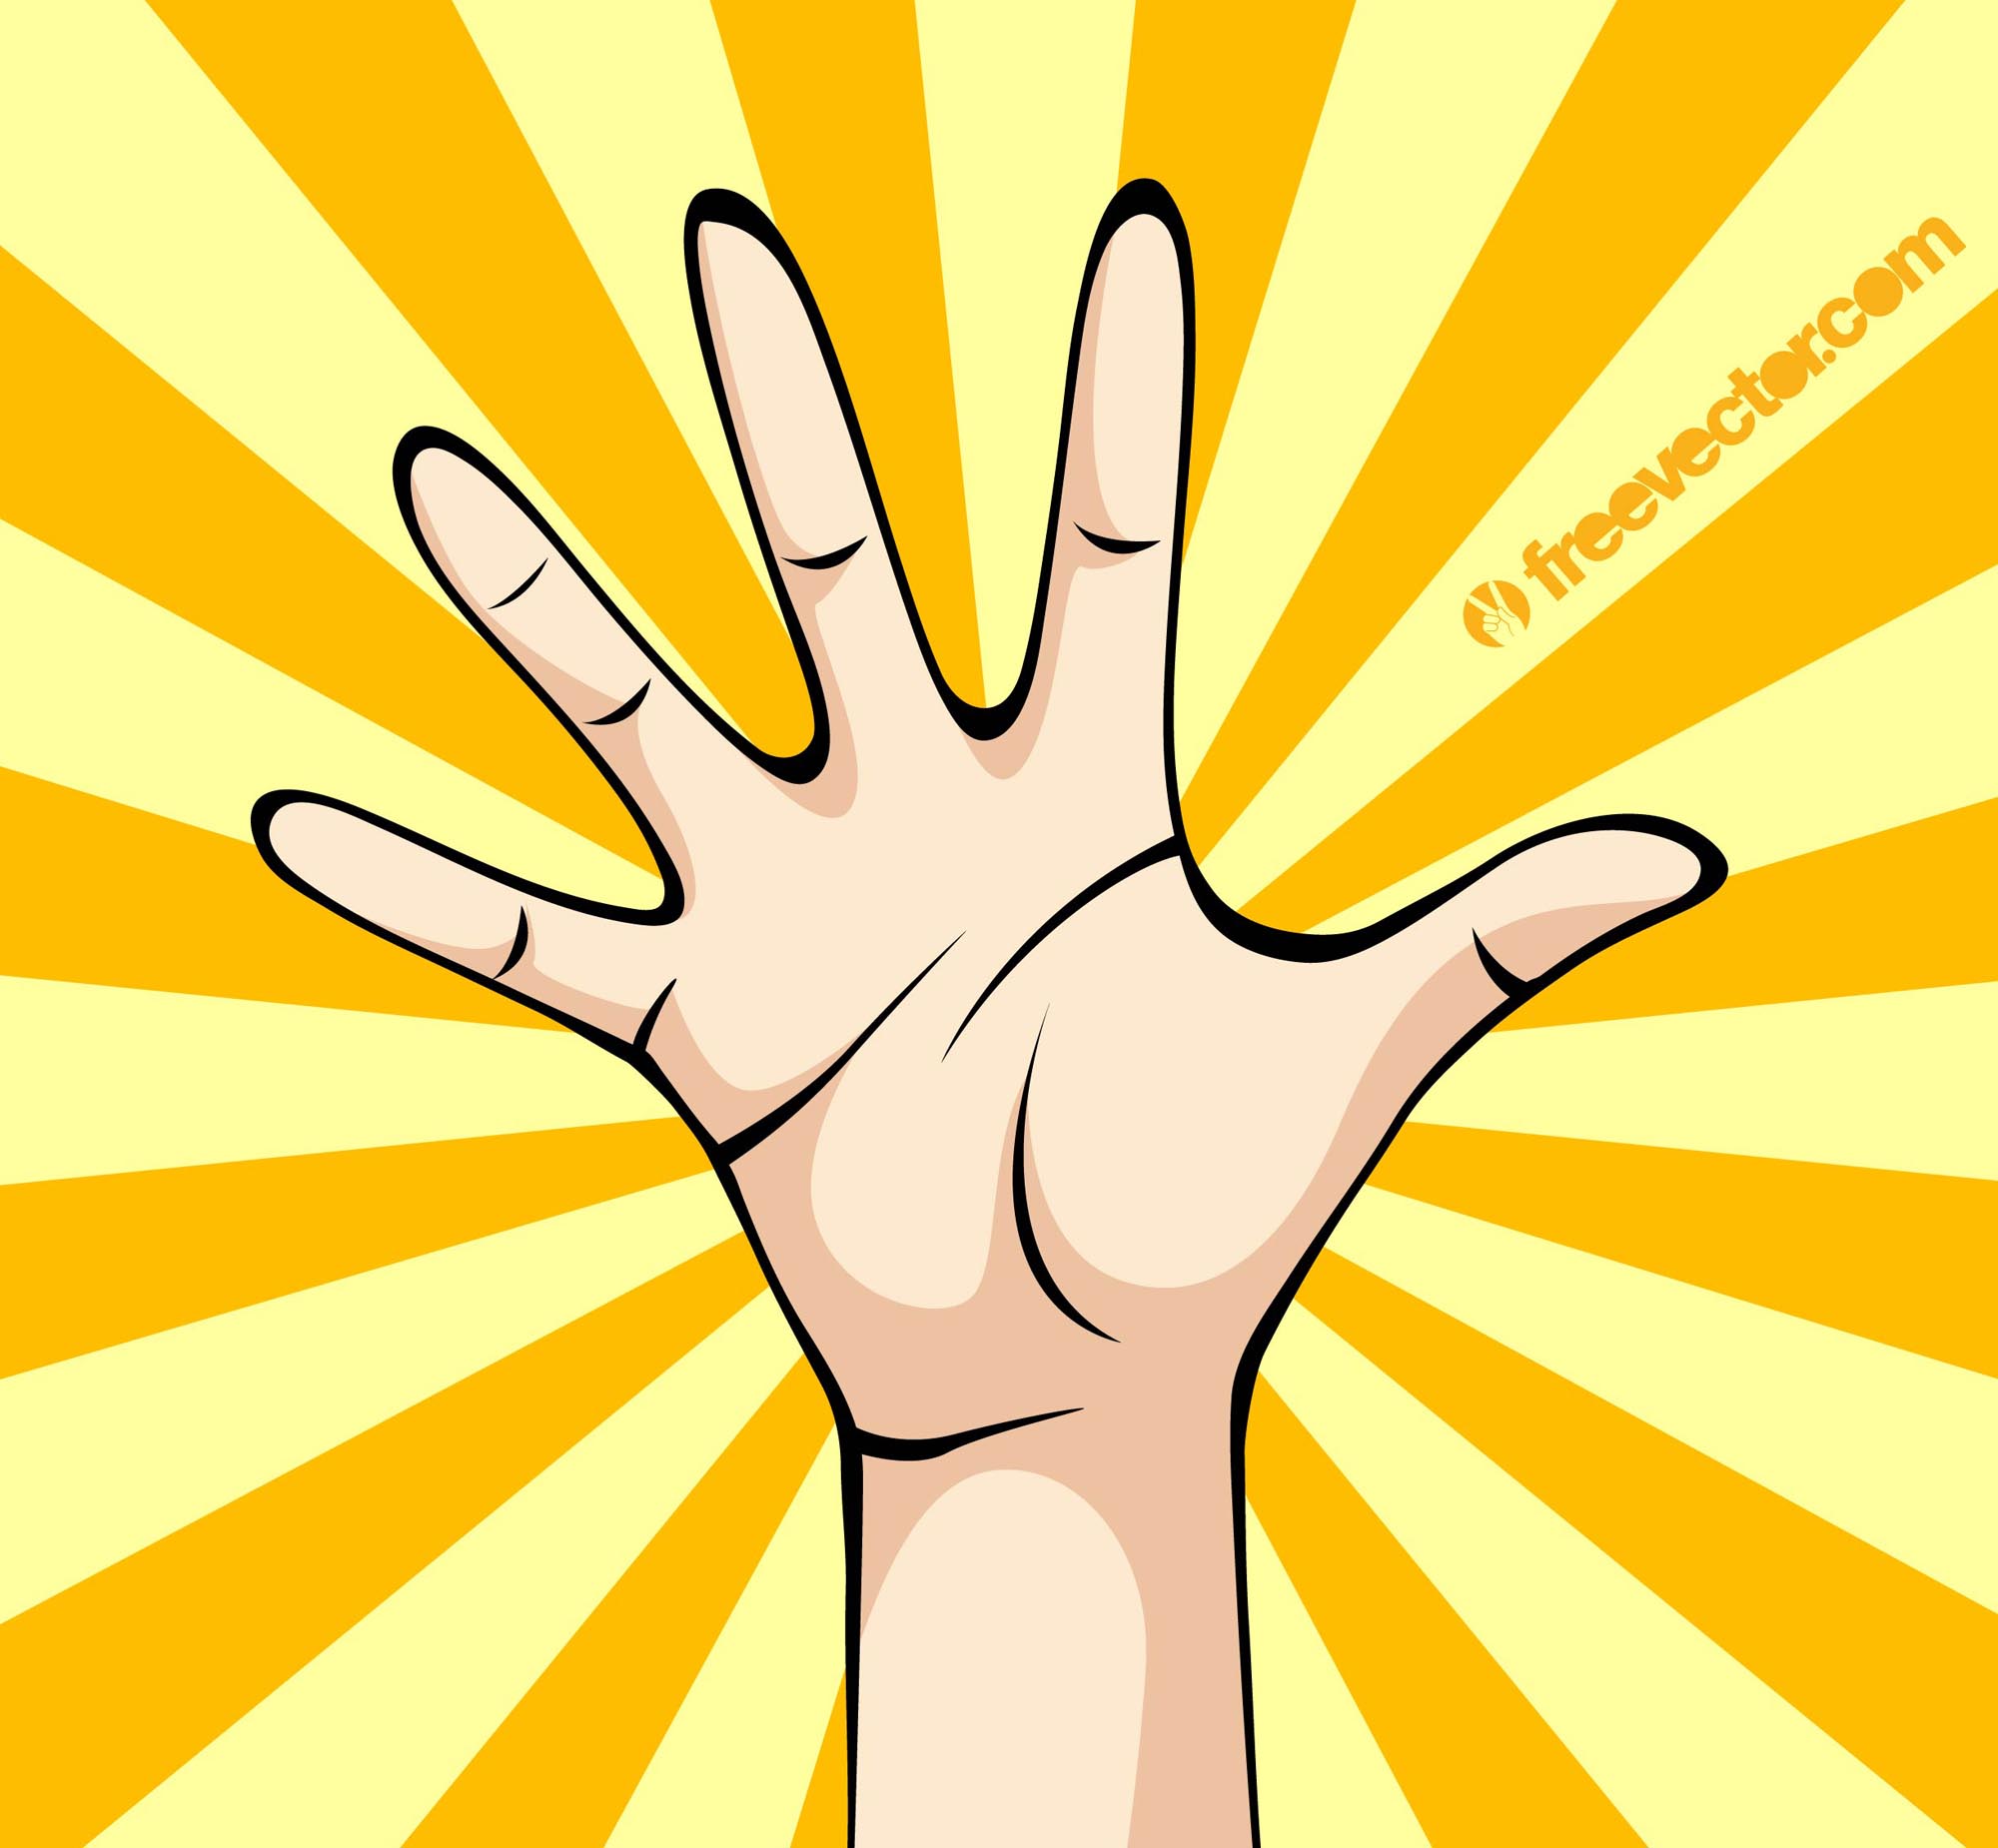 Hand Palm Outline   Clipart Panda   Free Clipart Images